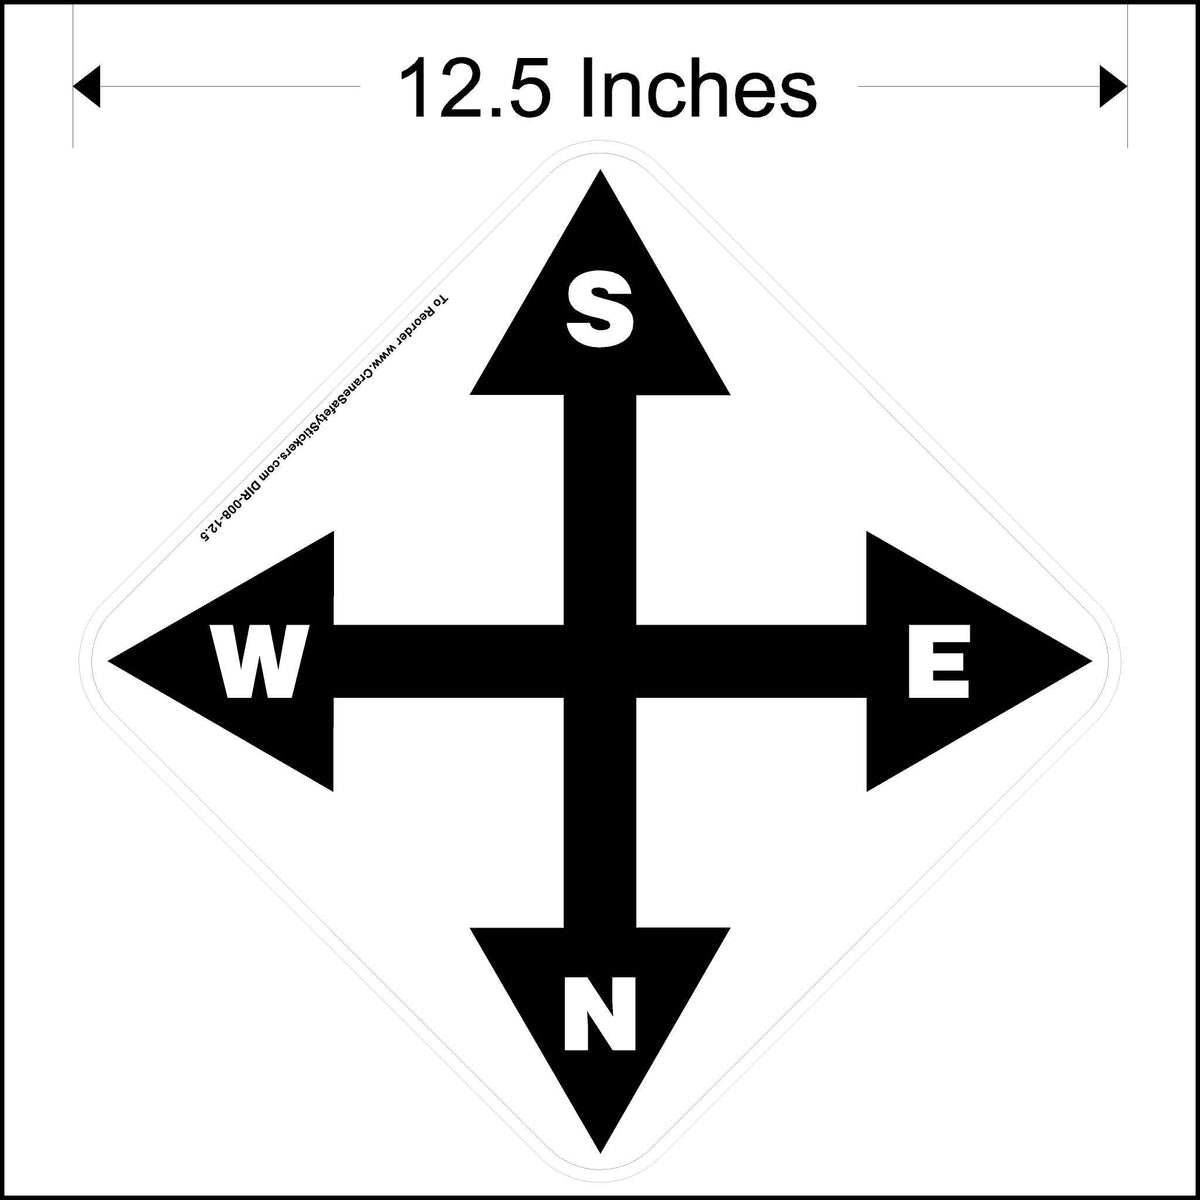 12.5 Inch South, east, north, and west overhead crane directional decal. Printed in black and white.